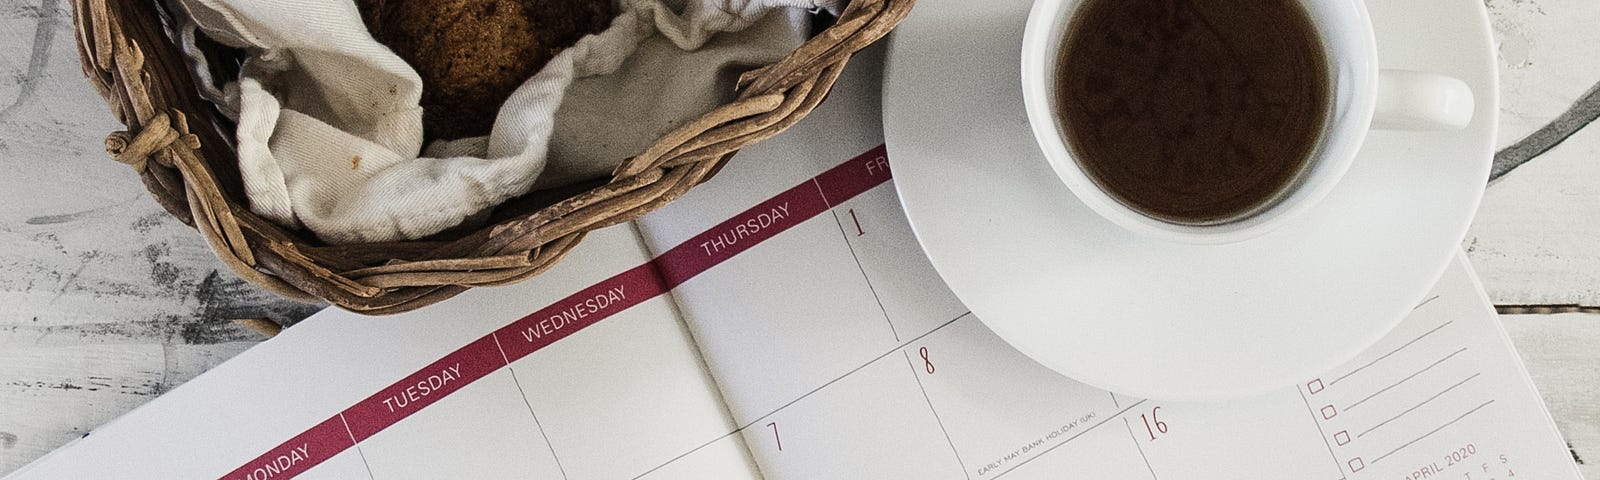 Image of a calendar and a cup of tea.